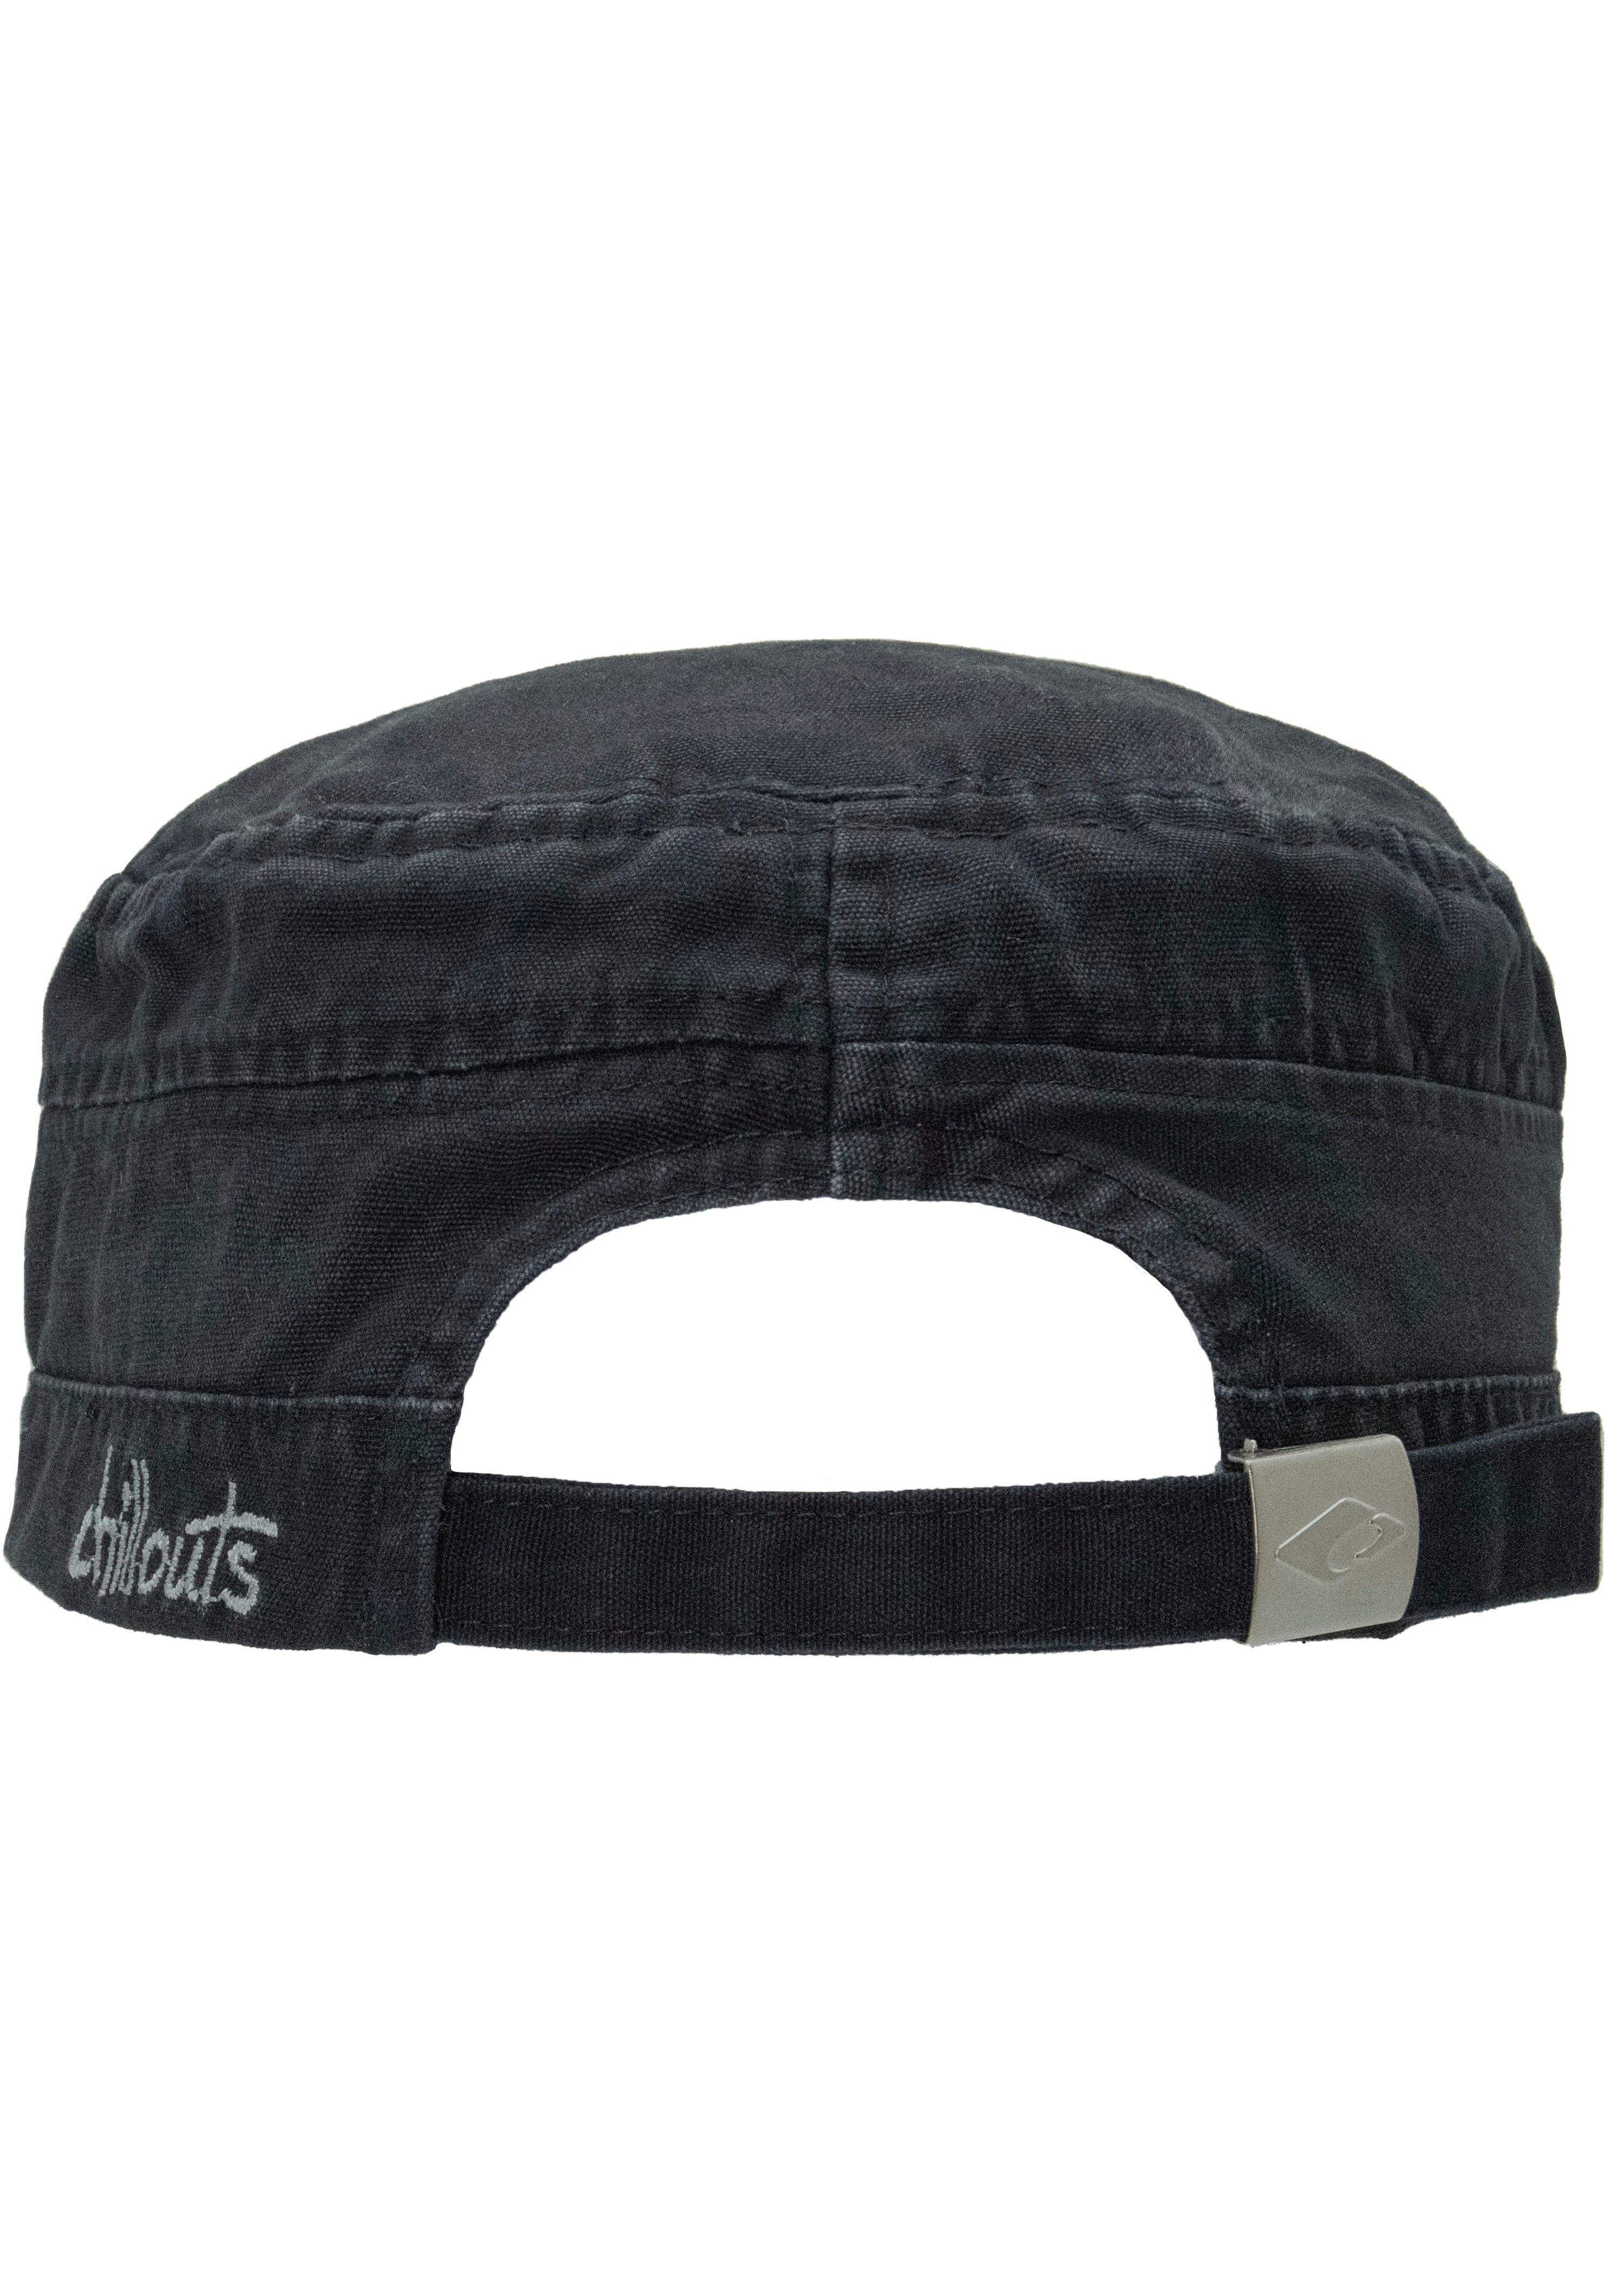 washed Size Paso atmungsaktiv, aus chillouts navy El Cap reiner One Army Hat Baumwolle,